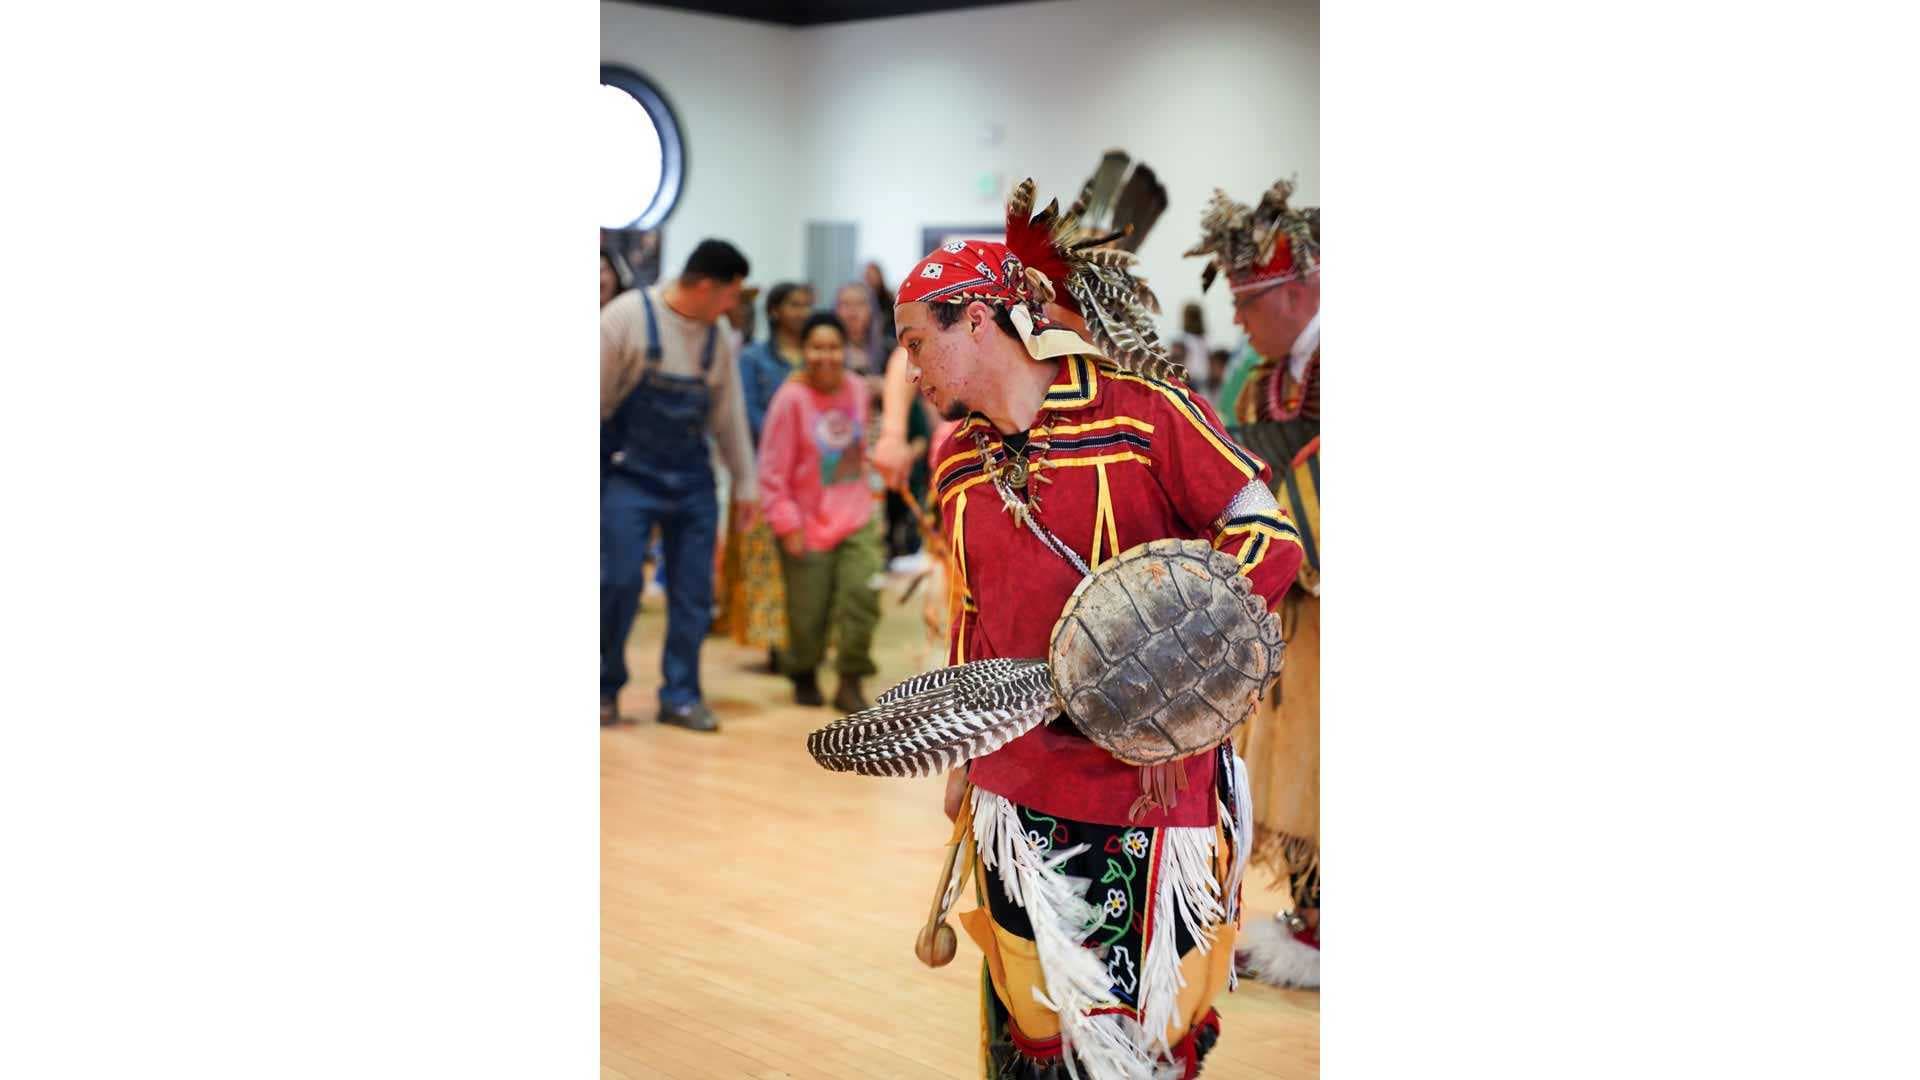 Native American with turtle shell and feathers at Pow Wow